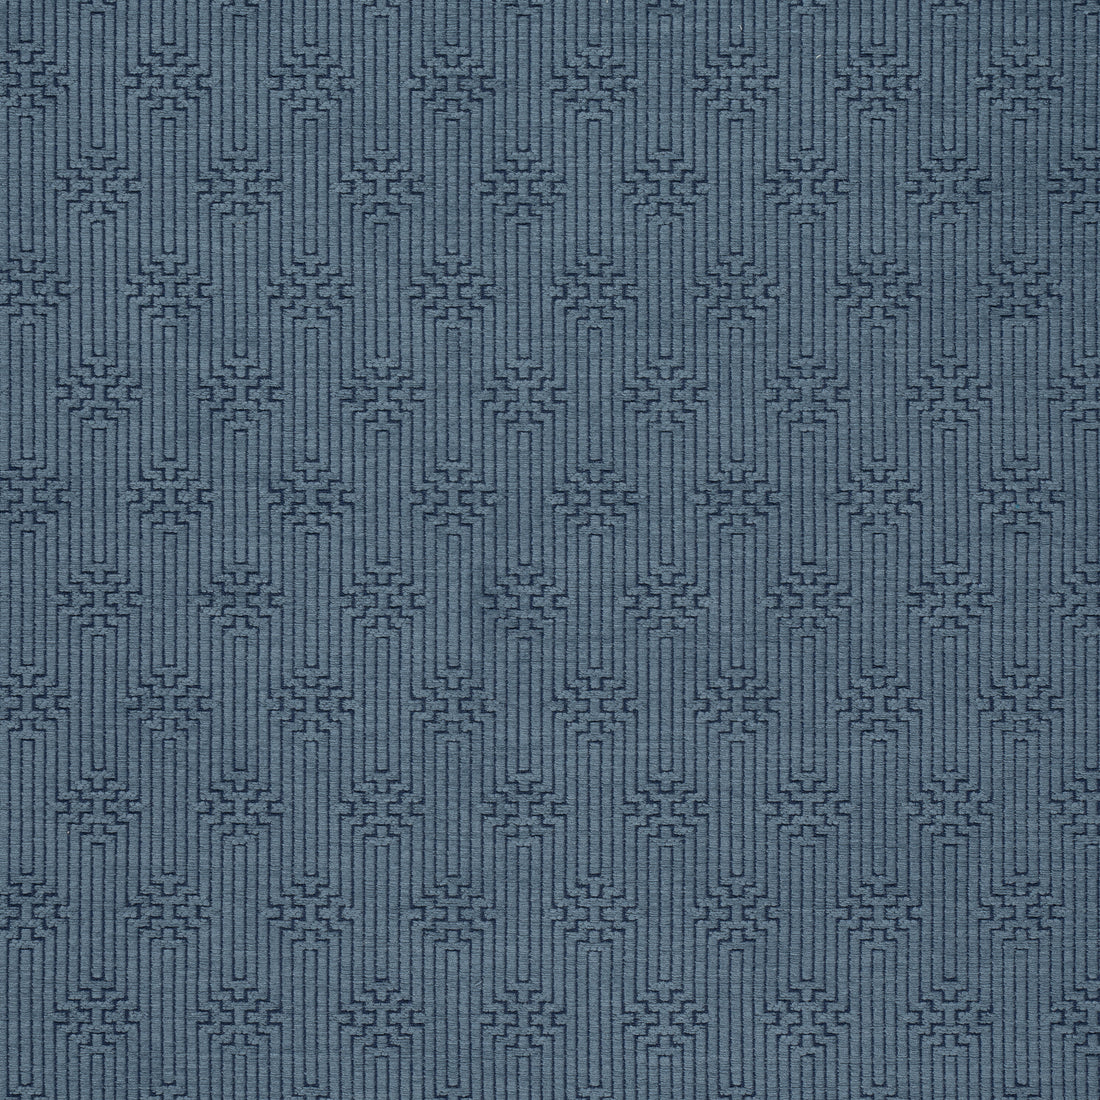 Crete fabric in lake color - pattern number W74210 - by Thibaut in the Passage collection